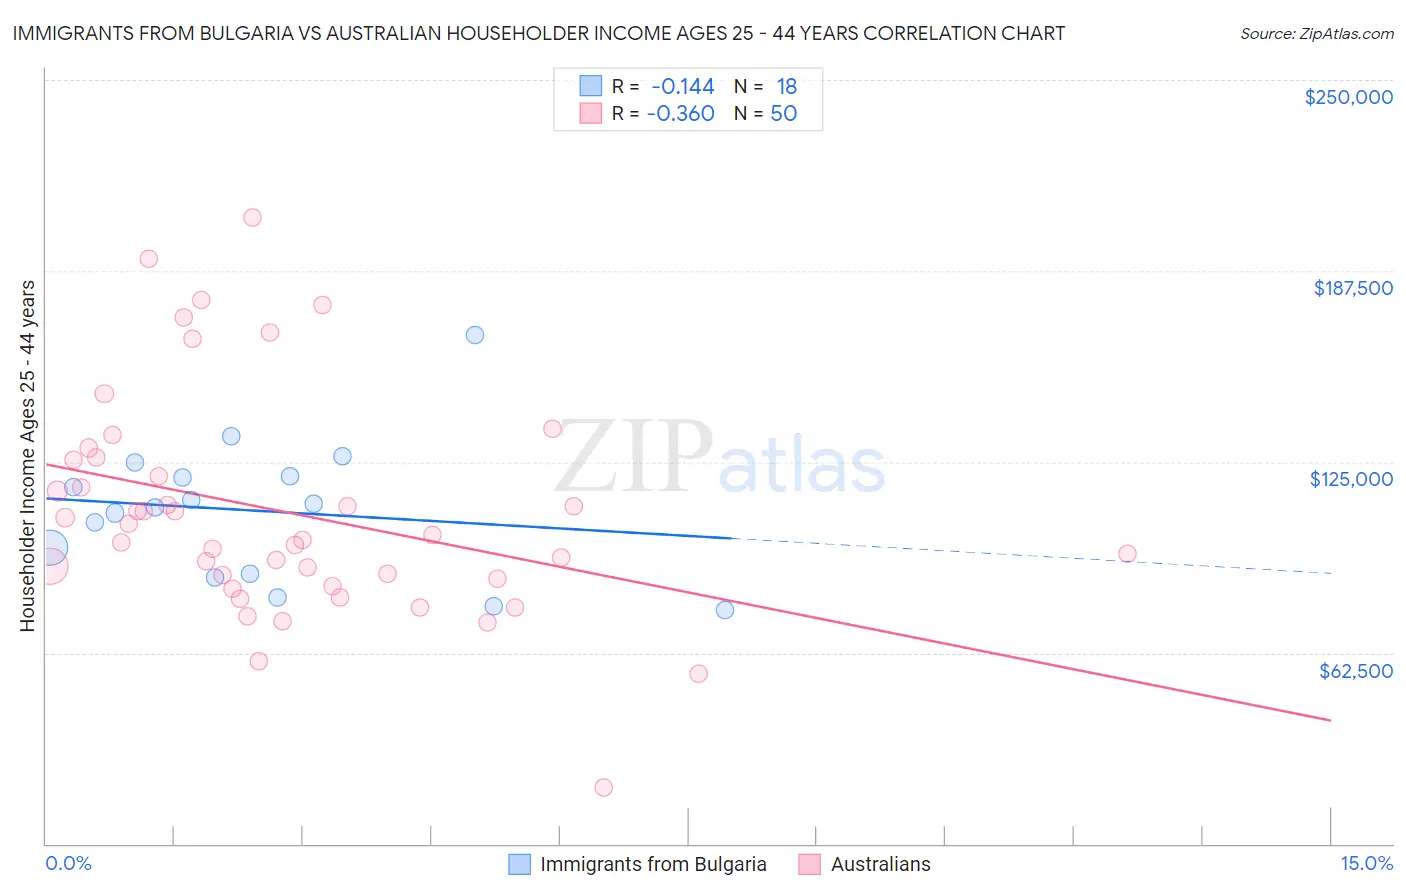 Immigrants from Bulgaria vs Australian Householder Income Ages 25 - 44 years